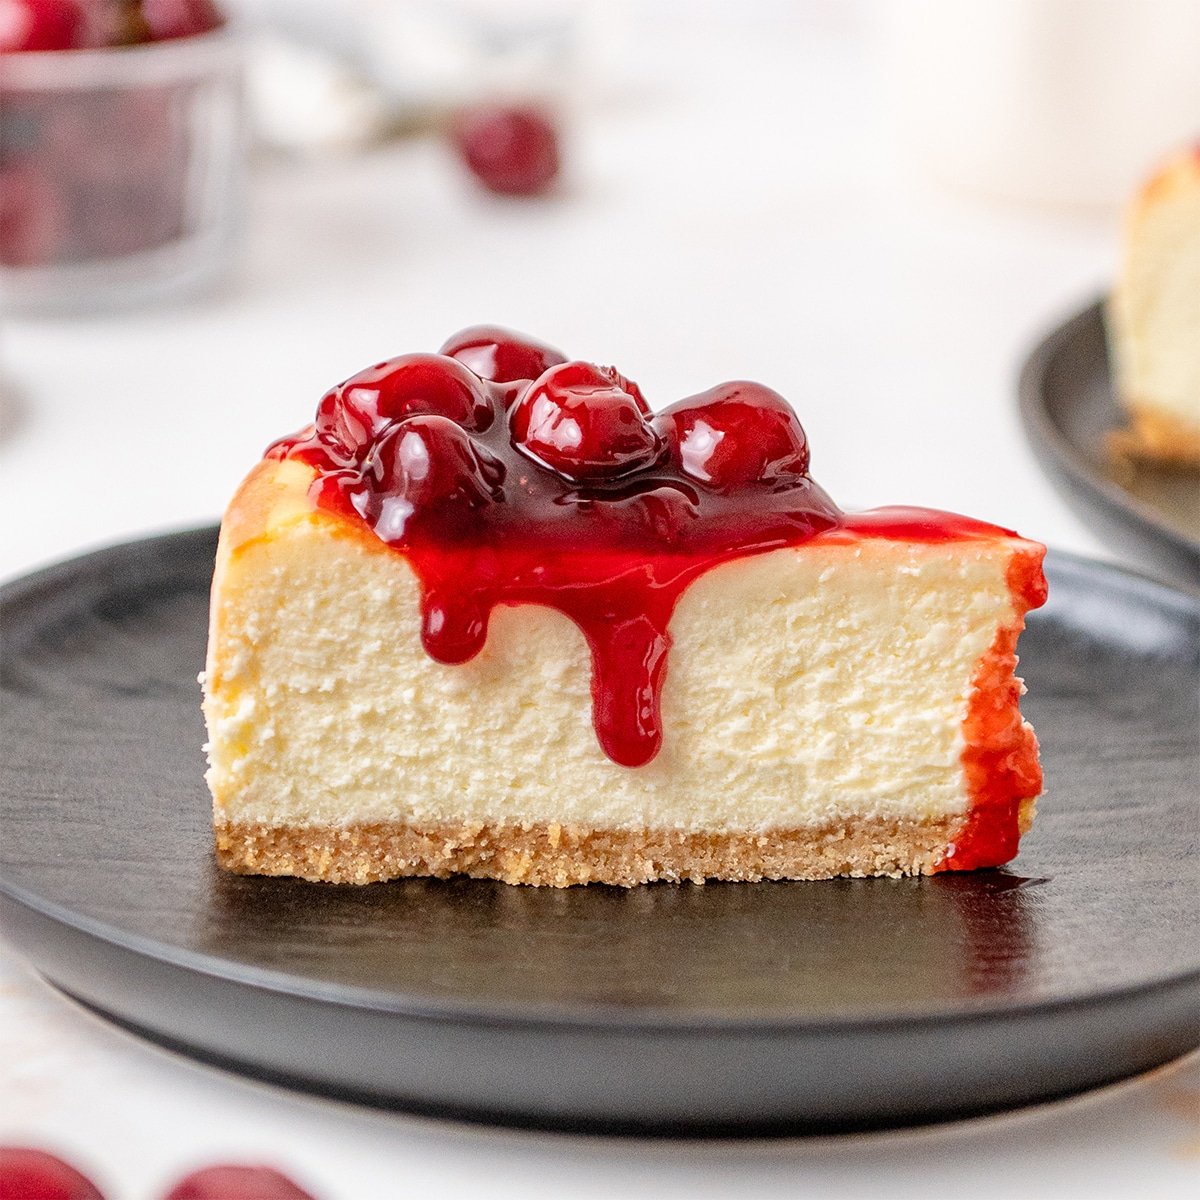 Cheesecake is the perfect #dessert for all special occasions!

Check out this Cherry Cheesecake recipe for a cheesecake that will dazzle your taste buds! 

sugargeekshow.com/recipe/homemad…

#NationalCherryCheesecakeDay #Cherrycheesecake #Cheesecake #BMD #CanadianPharmacy